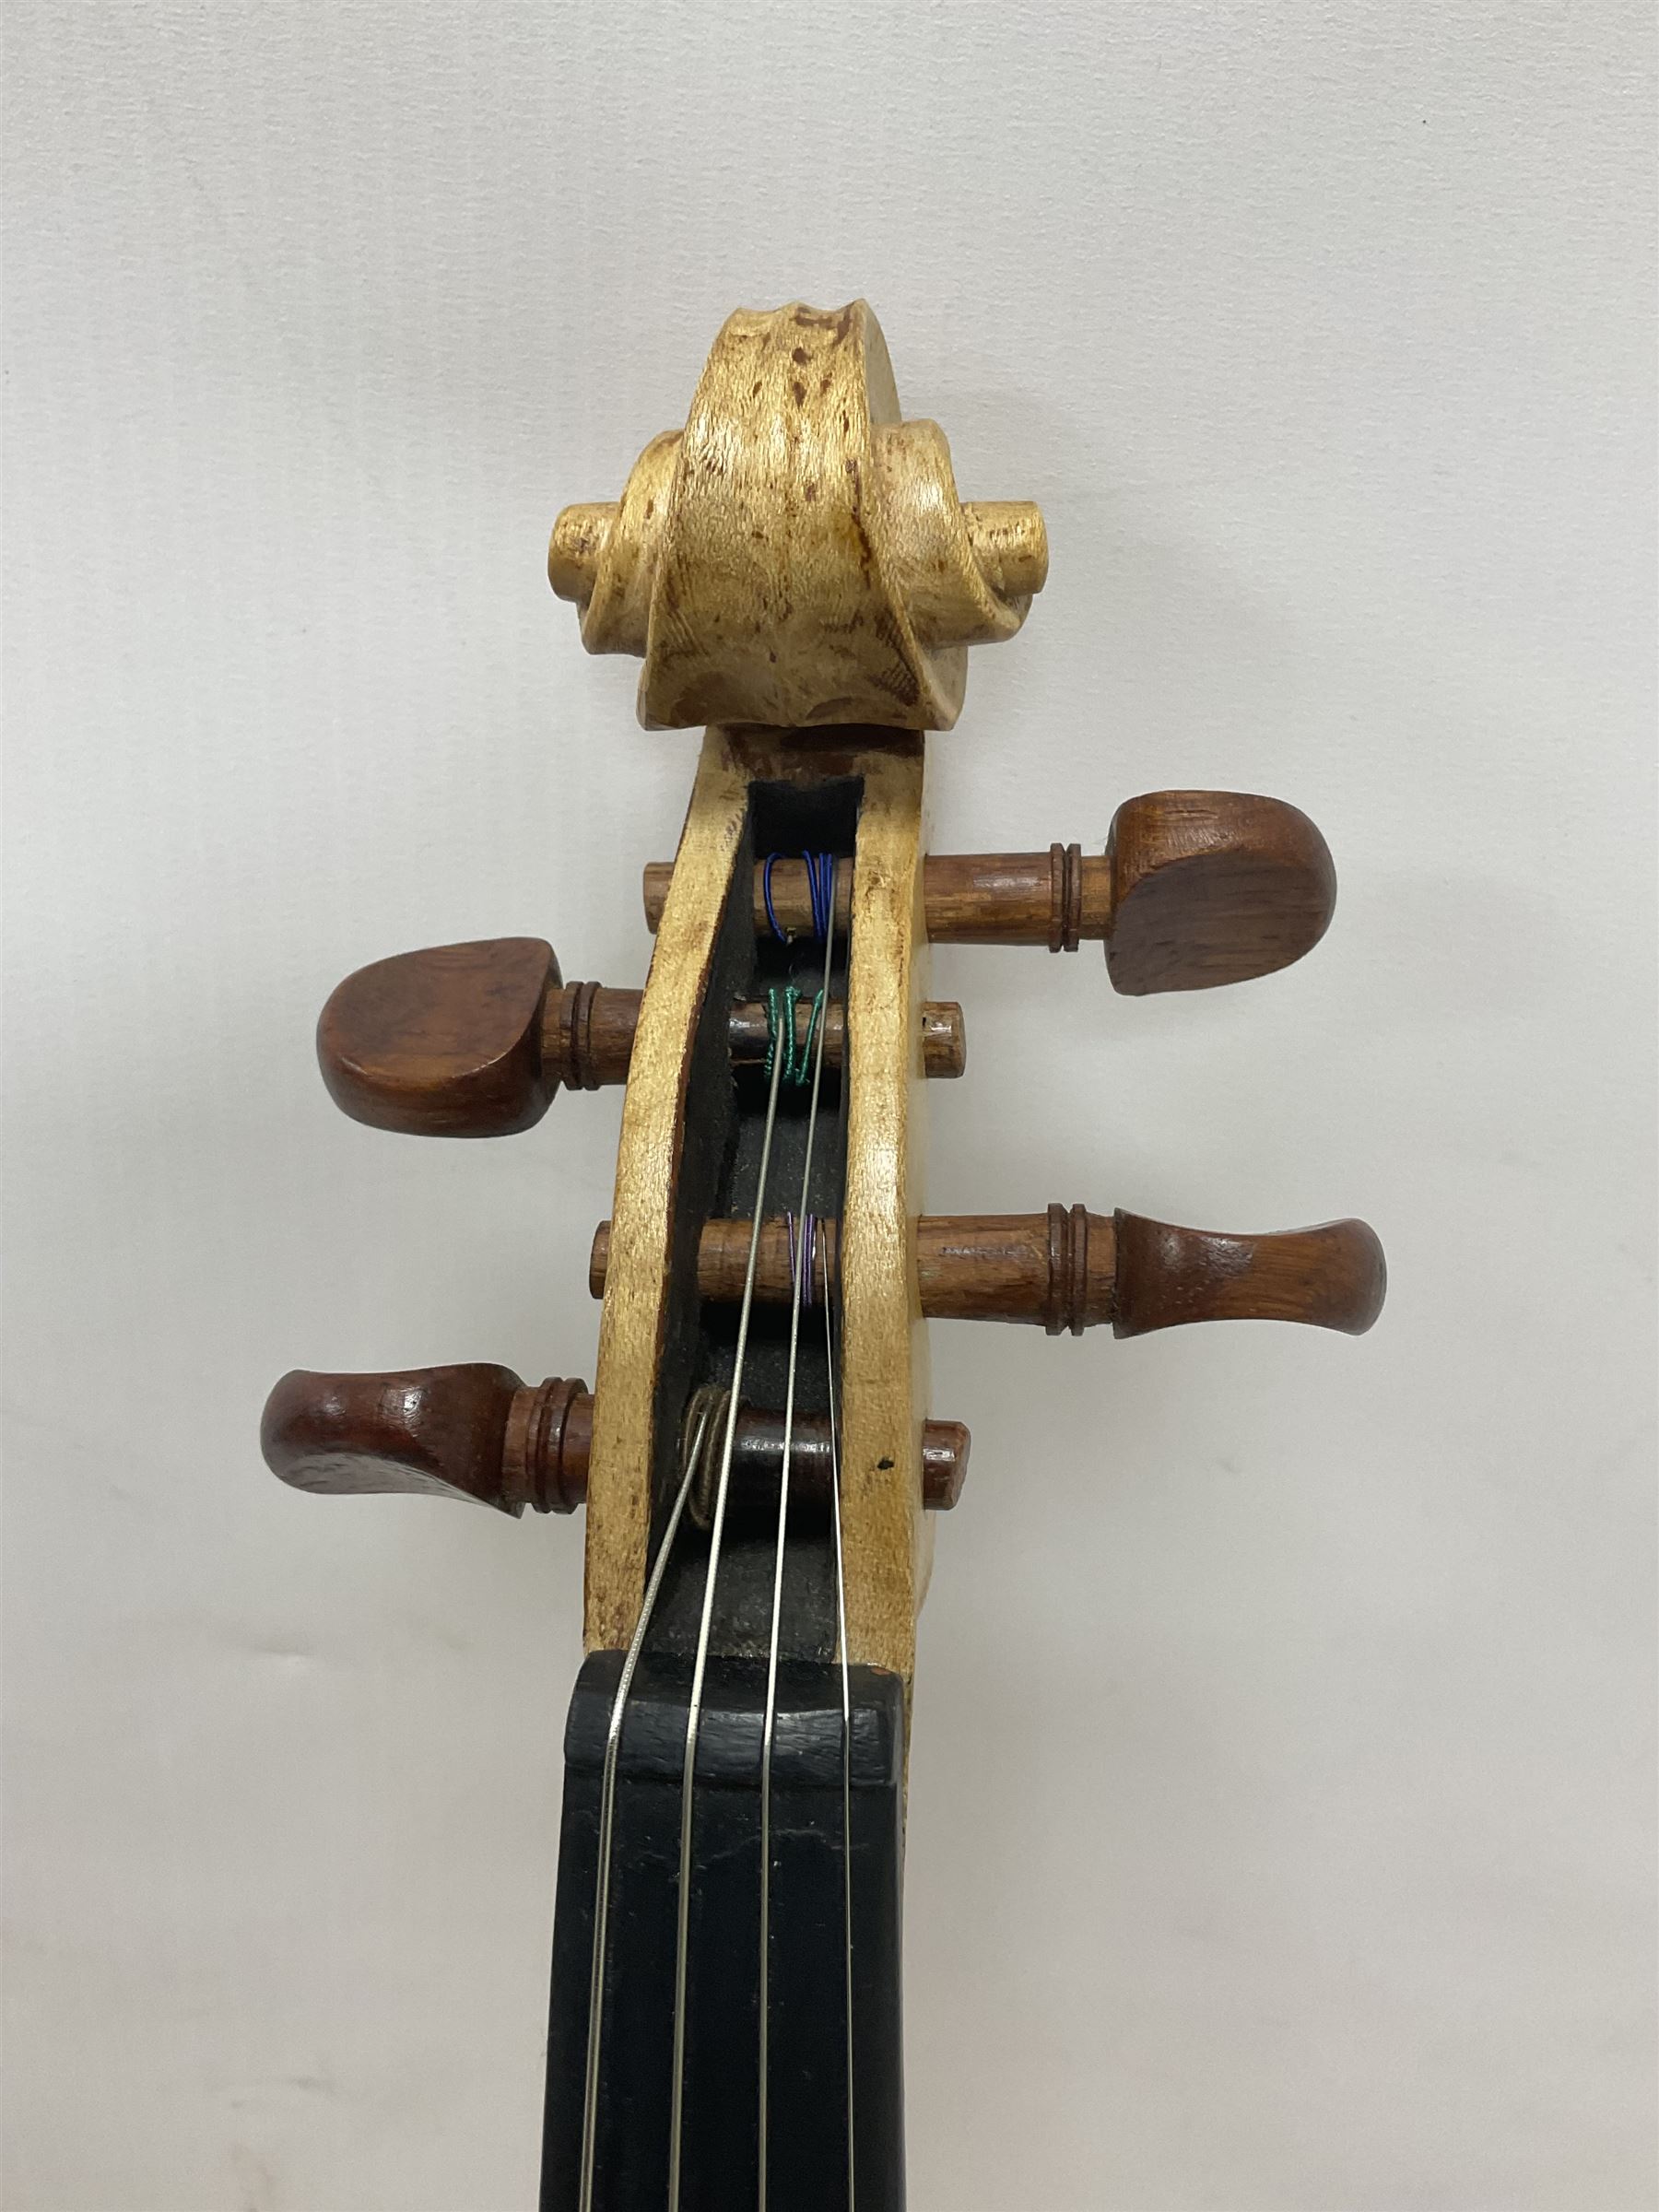 Copy of a full size Stradivarius violin with an ebonised fingerboard and tailpiece - Image 6 of 14